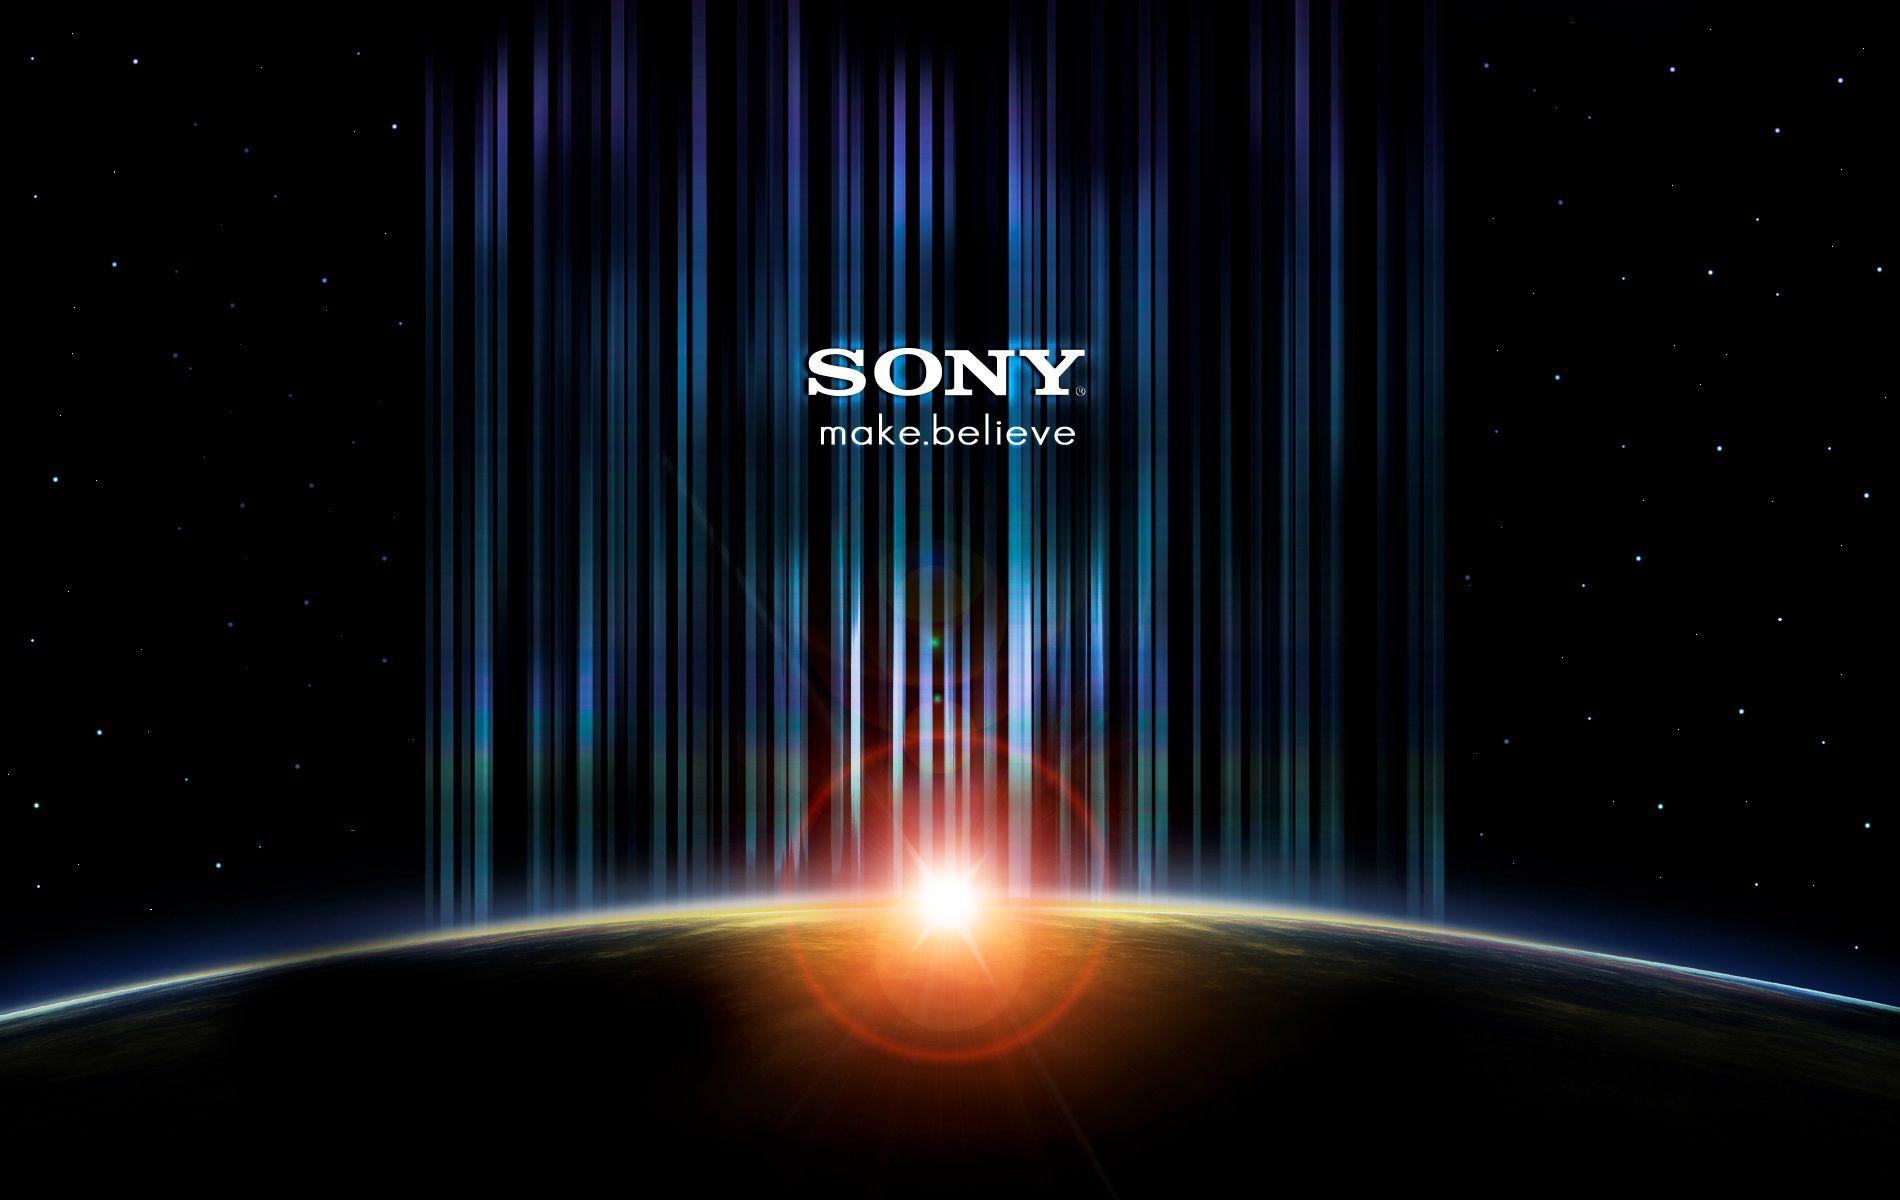 Sony Wallpapers HD - Wallpaper Cave